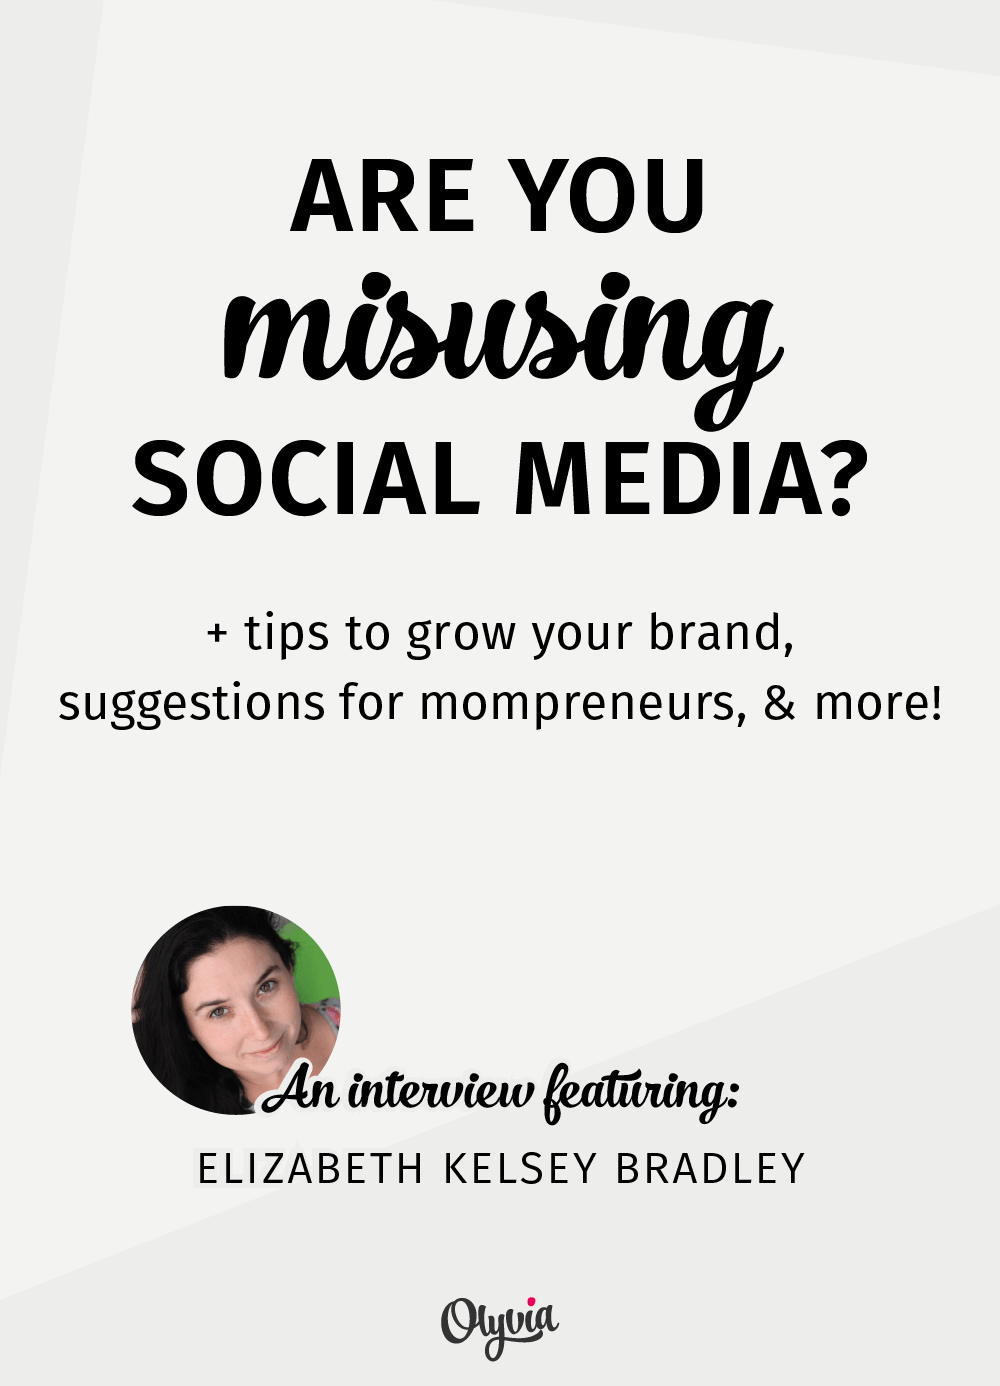 Are you using social media effectively to grow your blog or business? Elizabeth Kelsey Bradley of Savouring Simplicity shares her thoughts on mistakes people make when promoting their brand, + tips on entrepreneurship and being a mom business owner. | Olyvia.co